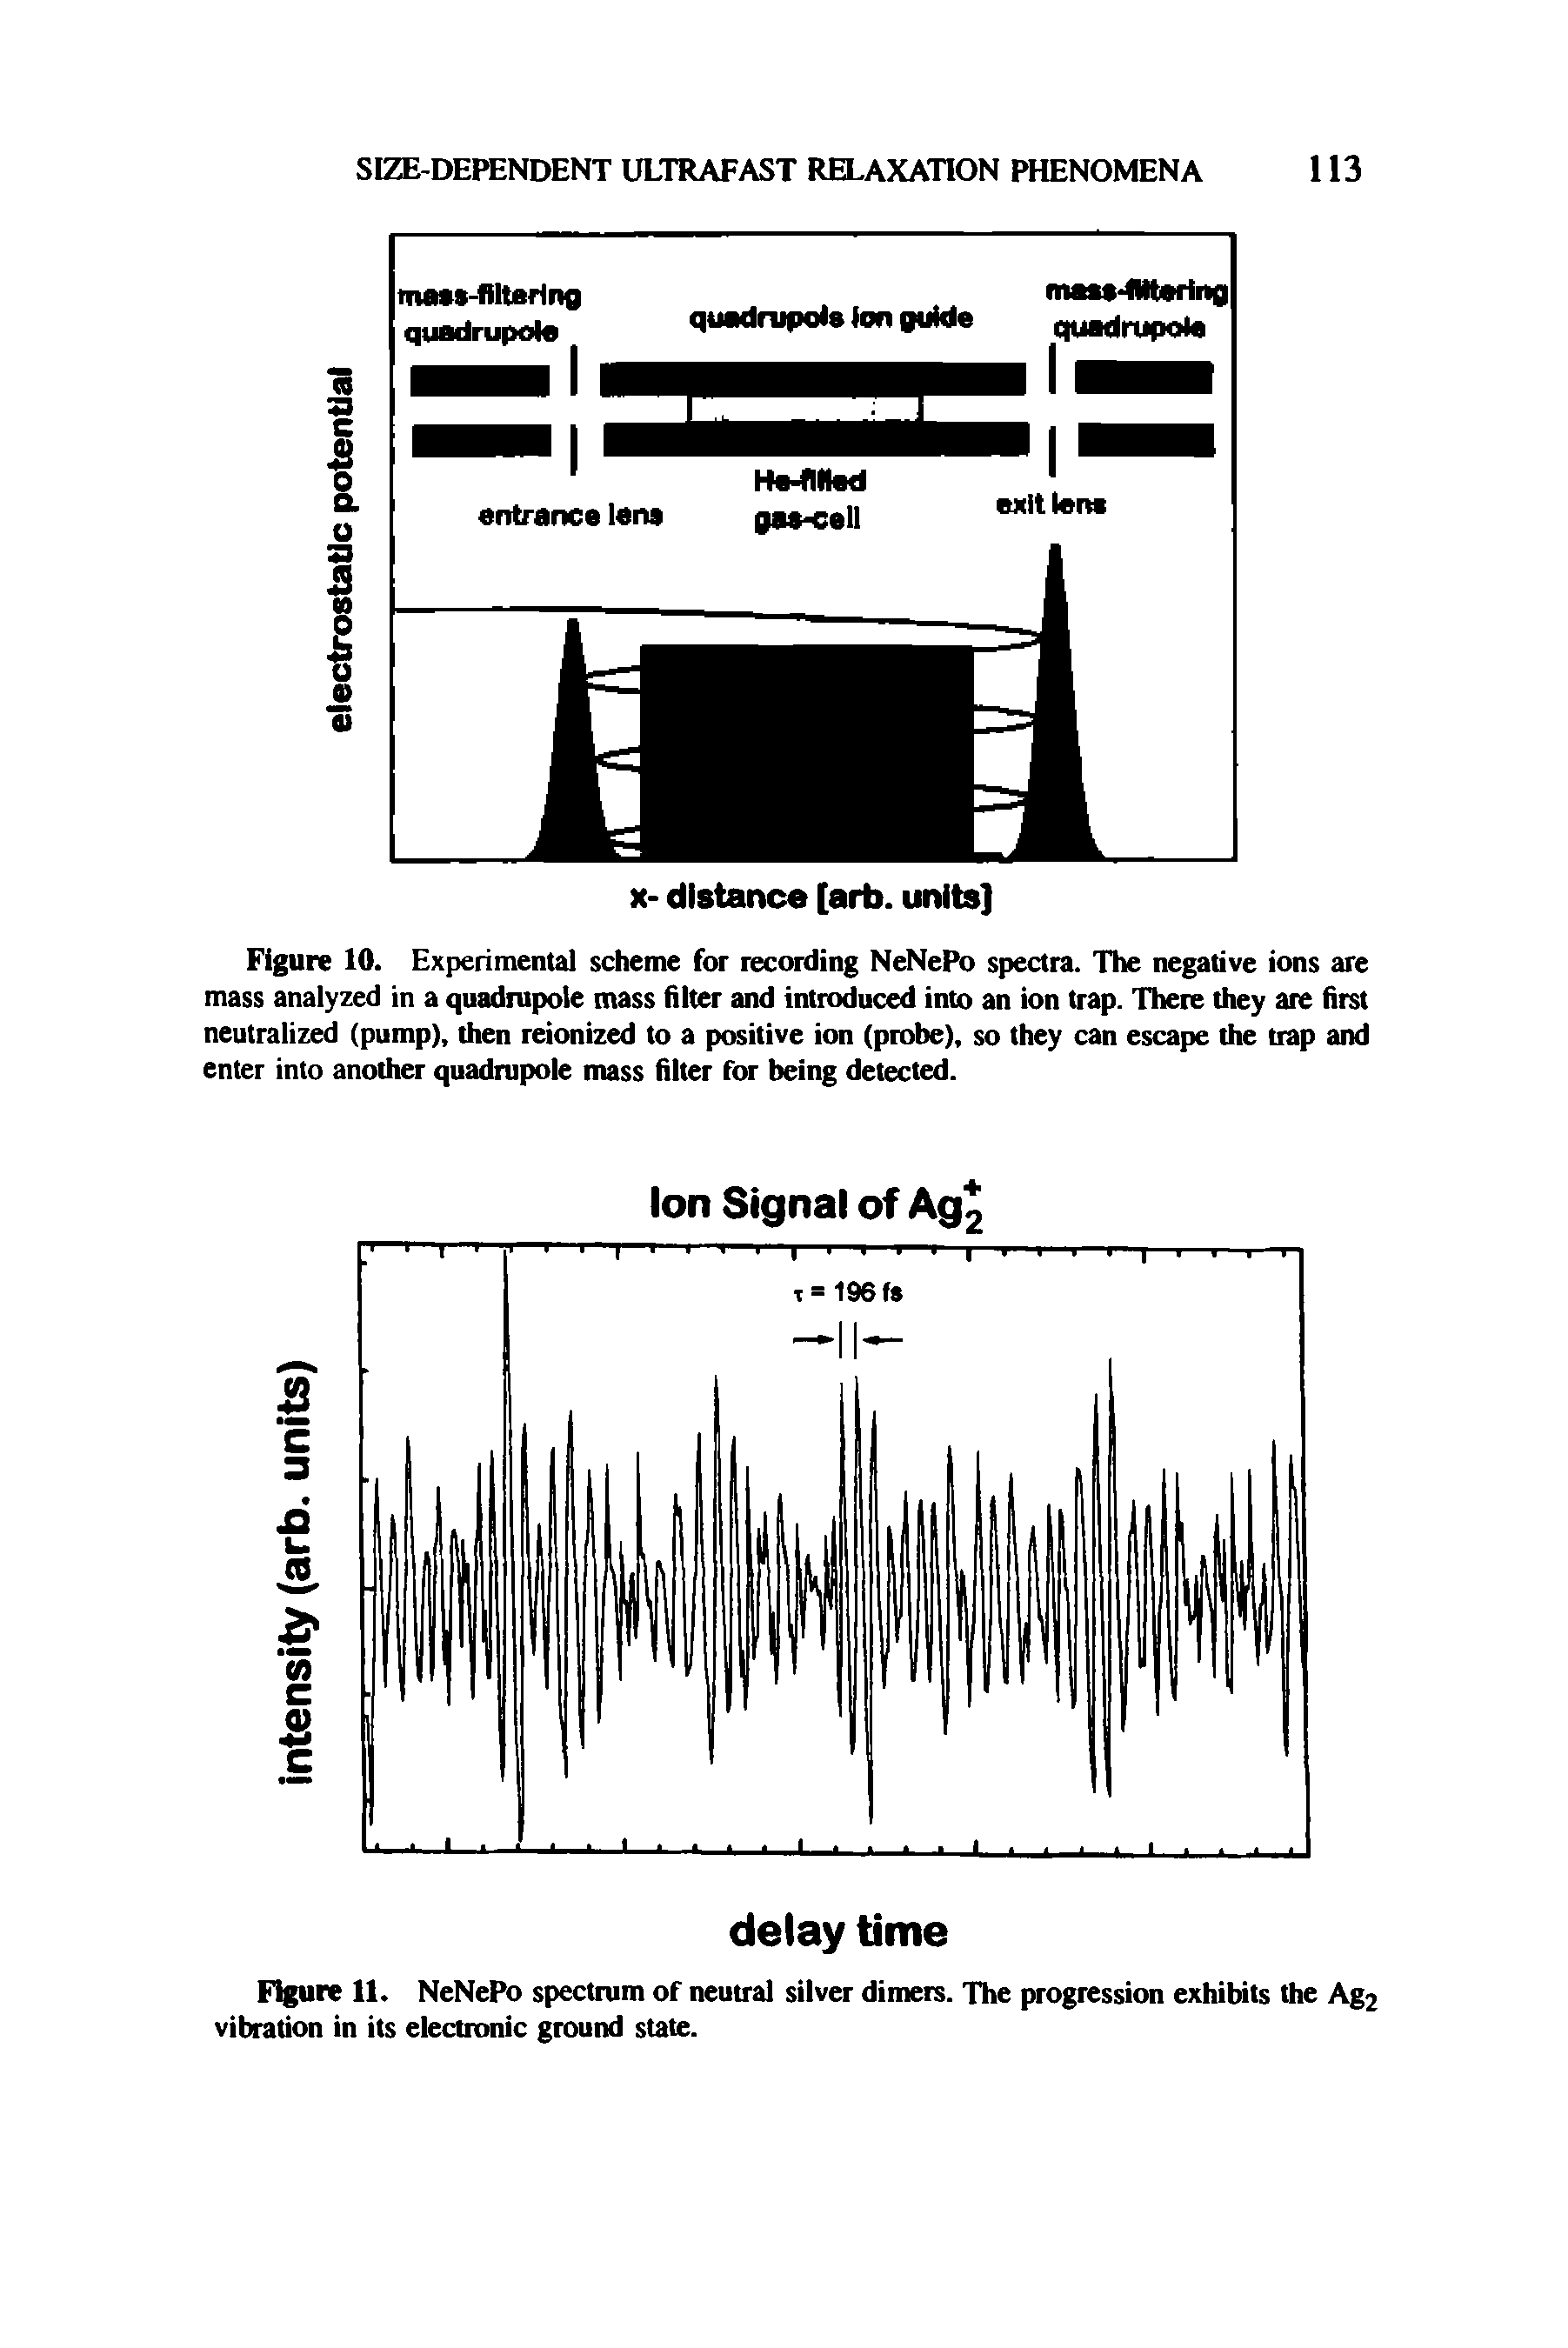 Figure 10. Experimental scheme for recording NeNePo spectra. The negative ions are mass analyzed in a quadrupole mass filter and introduced into an ion trap. There they are first neutralized (pump), then reionized to a positive ion (probe), so they can escape the trap and enter into another quadrupole mass filter for being detected.